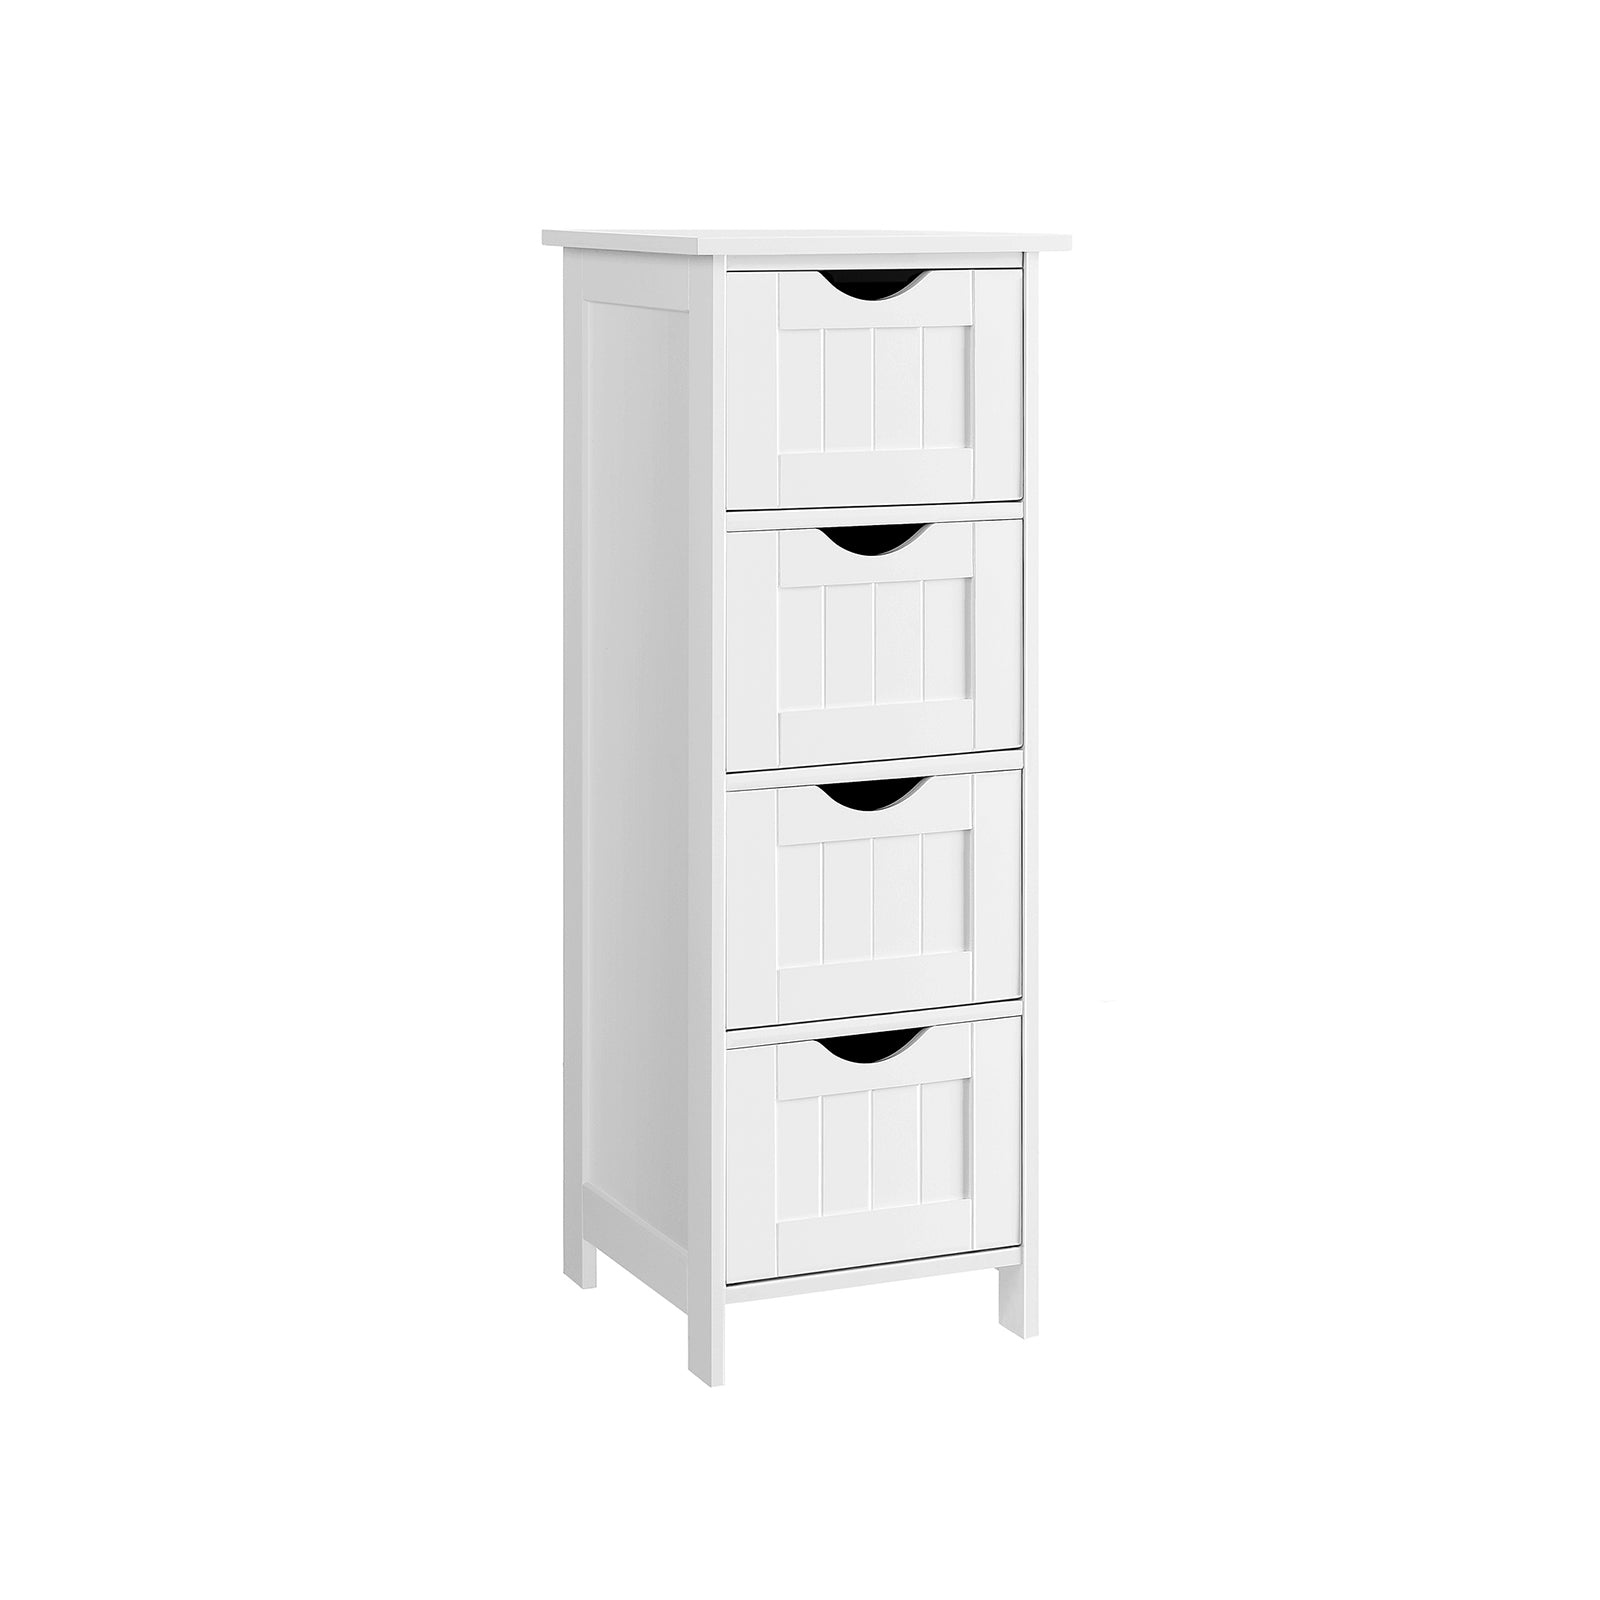 Image of Songmics - Bathroom Storage Cupboard Storage Cabinet Standing Wooden with 4 drawers 30 x 30 x 82cm White LHC40W